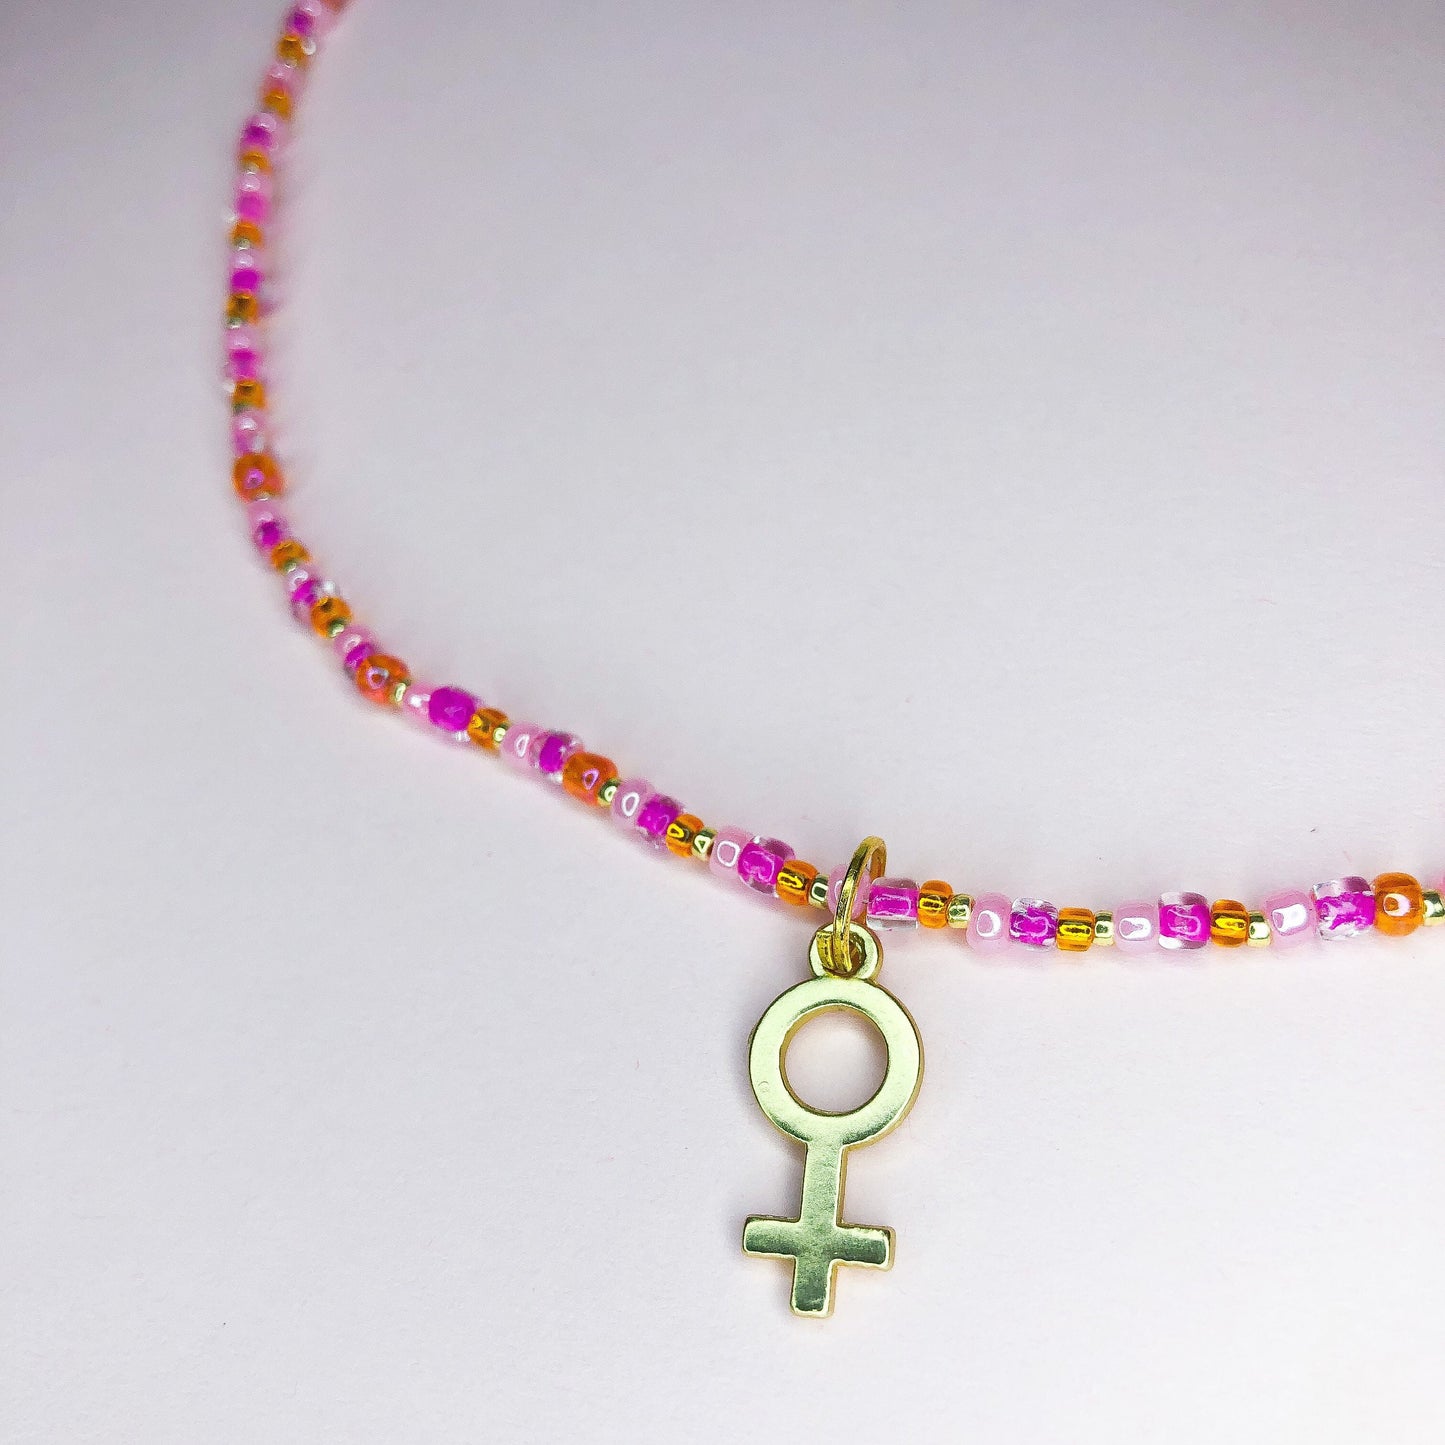 Pink Orange and Gold beaded necklace with gold venus charm